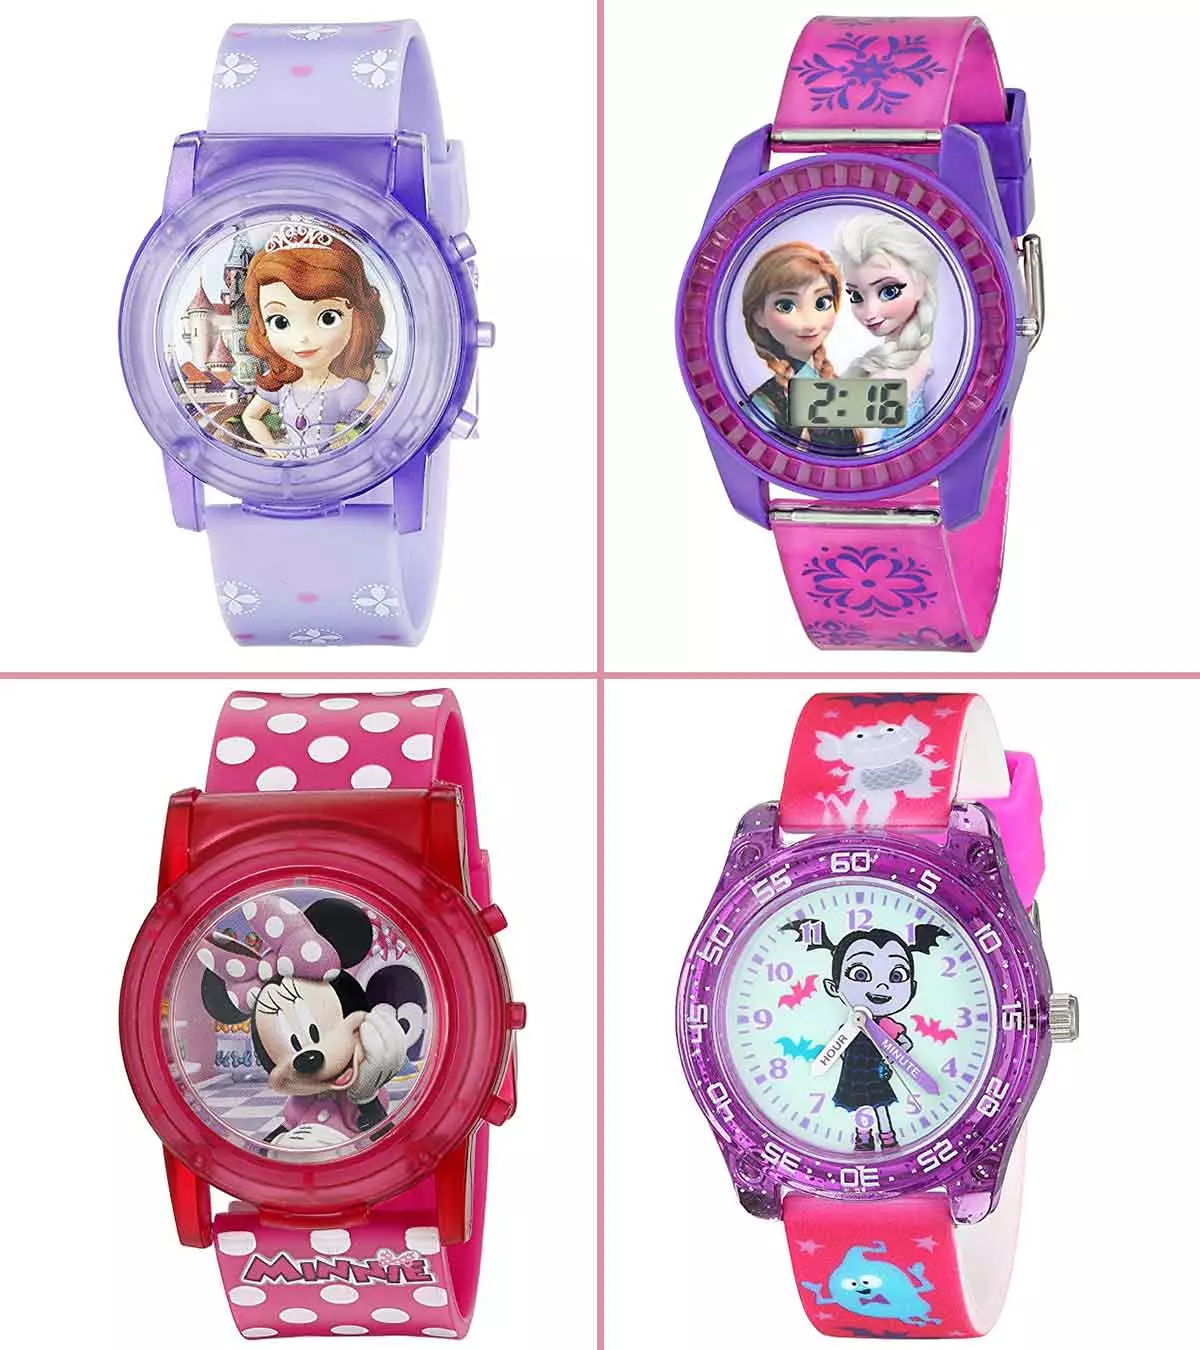 15 Best Disney Watches For Kids To Buy In 2020